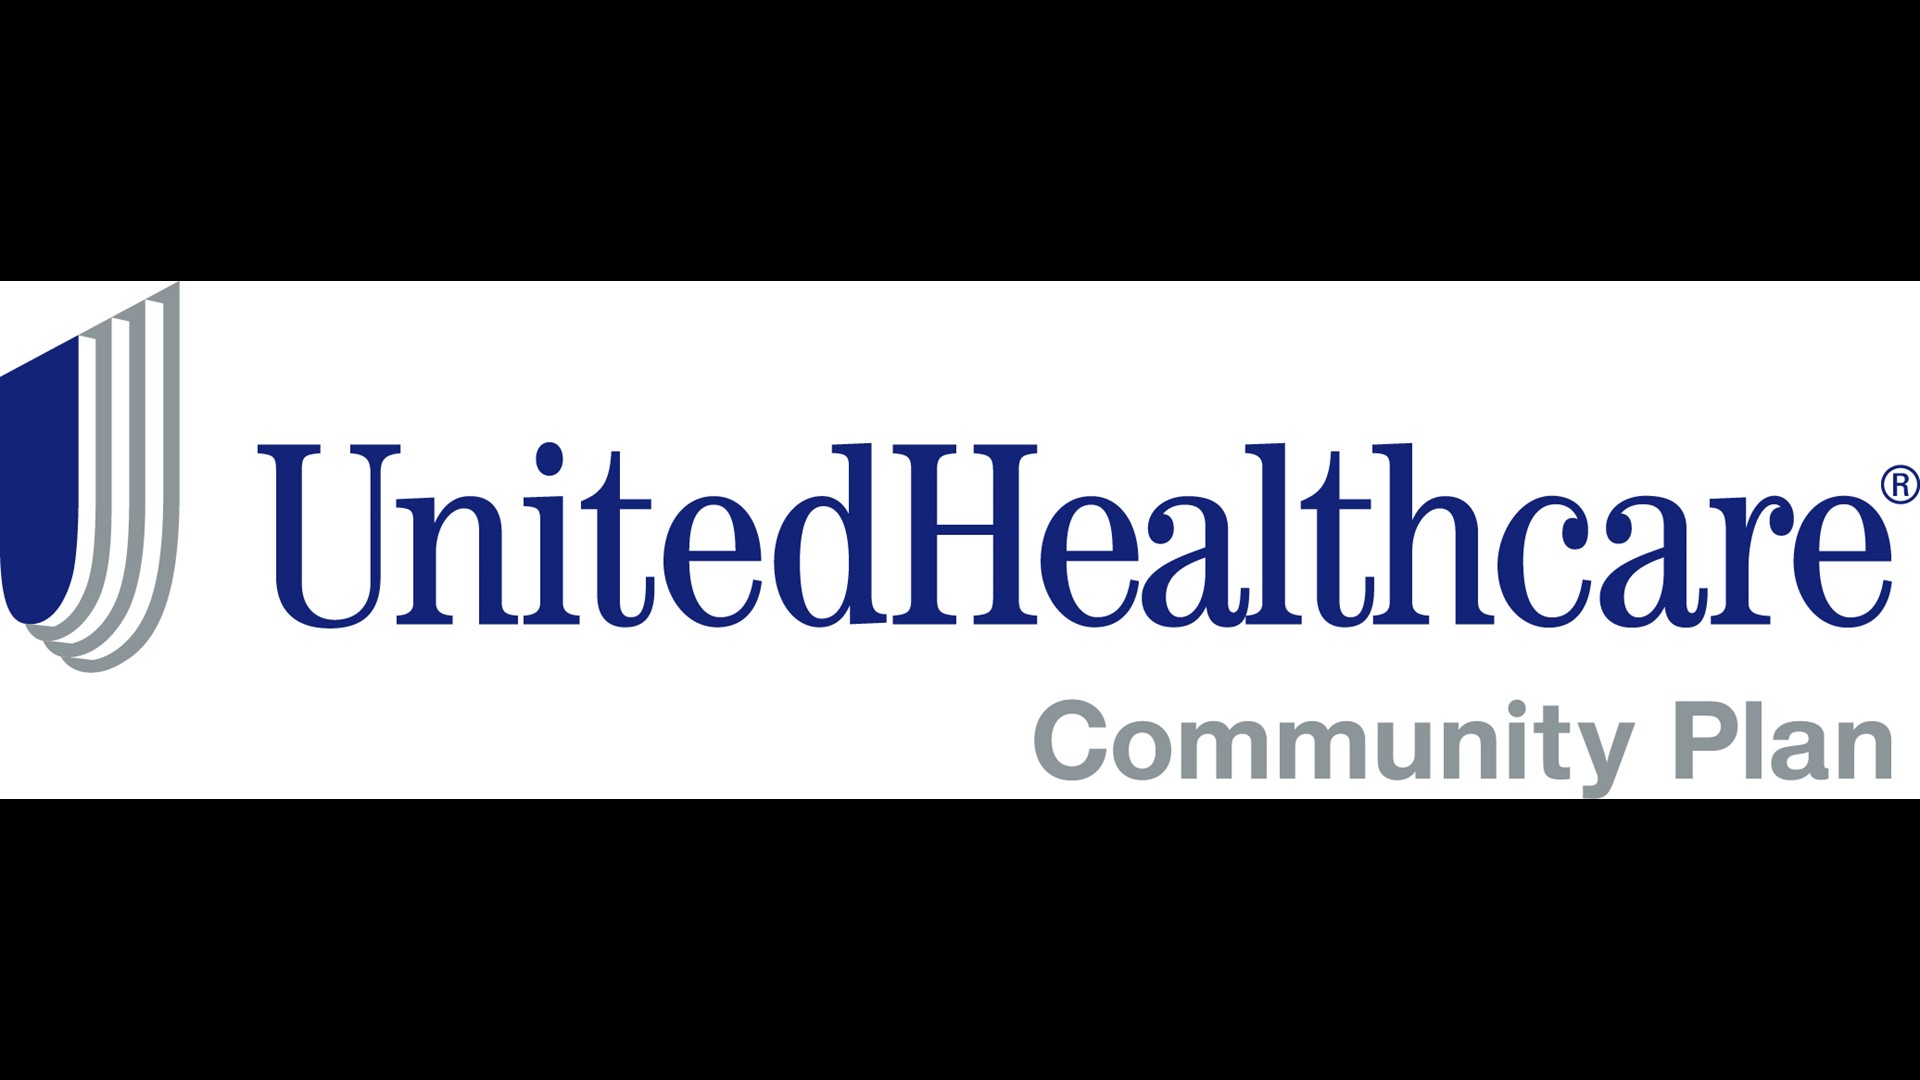 UnitedHealthcare helps support programs in the Louisville community that help people getting healthier and live more fulfilling lives. One of those organizations that UnitedHealthcare has partnered with is The Heuser Hearing and Learning Institute. UnitedHealthcare is located at 3847 Cane Run Road in Louisville, KY. For more information, call 502-498-4705 or go to UHCCP.com/KY. To learn more about The Heuser Hearing Institute, call 502-584-3573 or go to TheHearingInstitute.org.